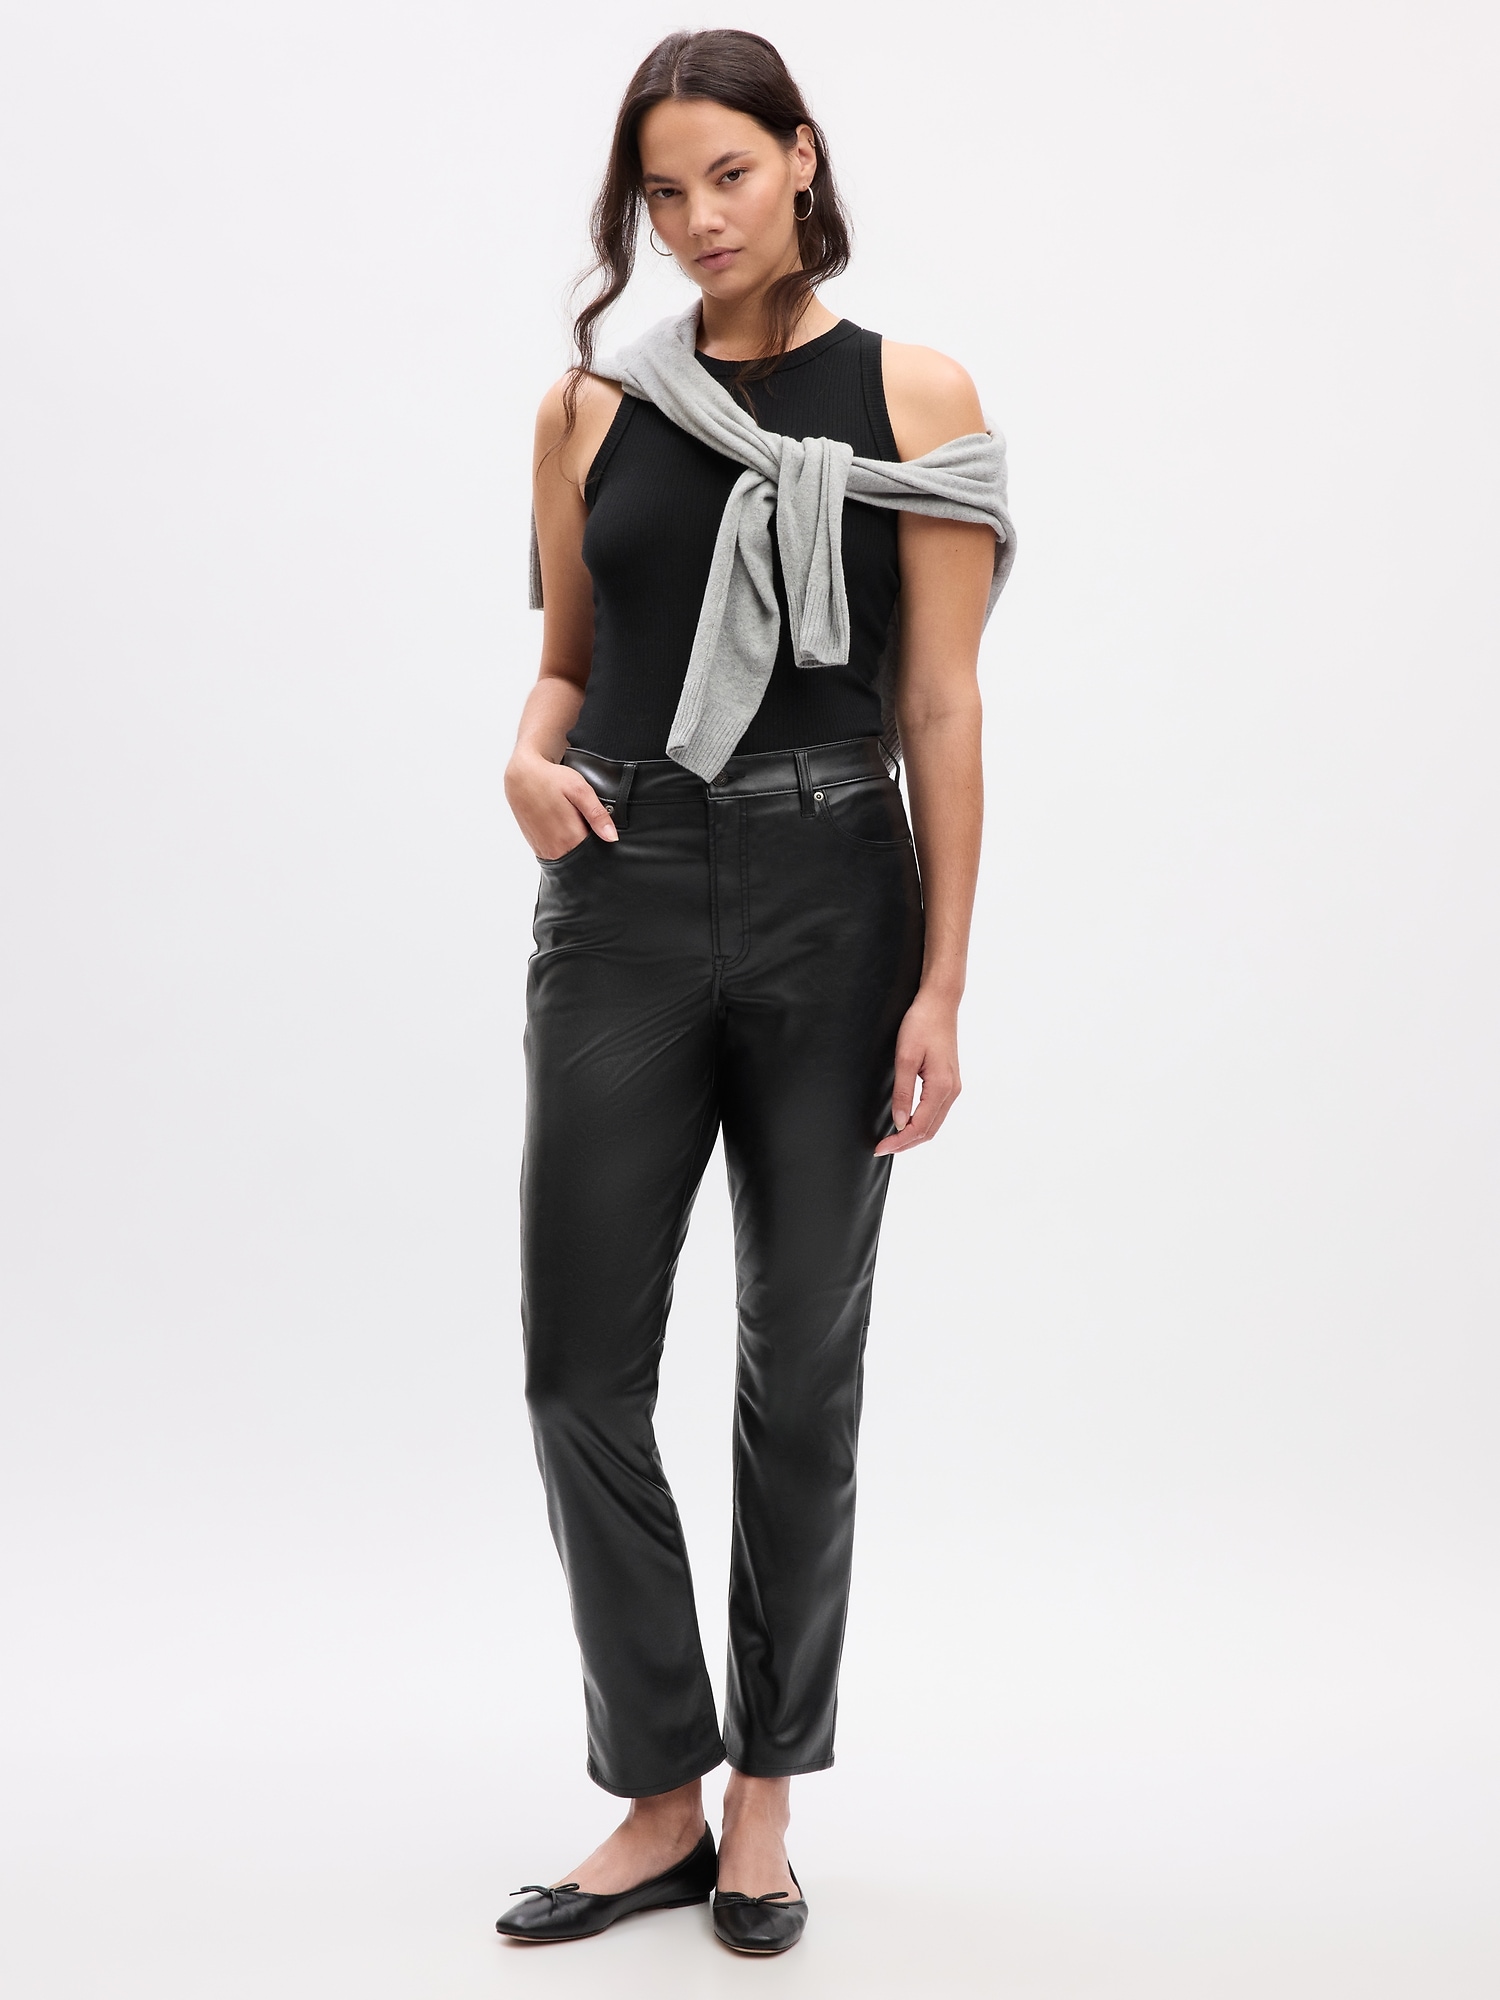 River Island straight cut faux leather trouser in black | ASOS